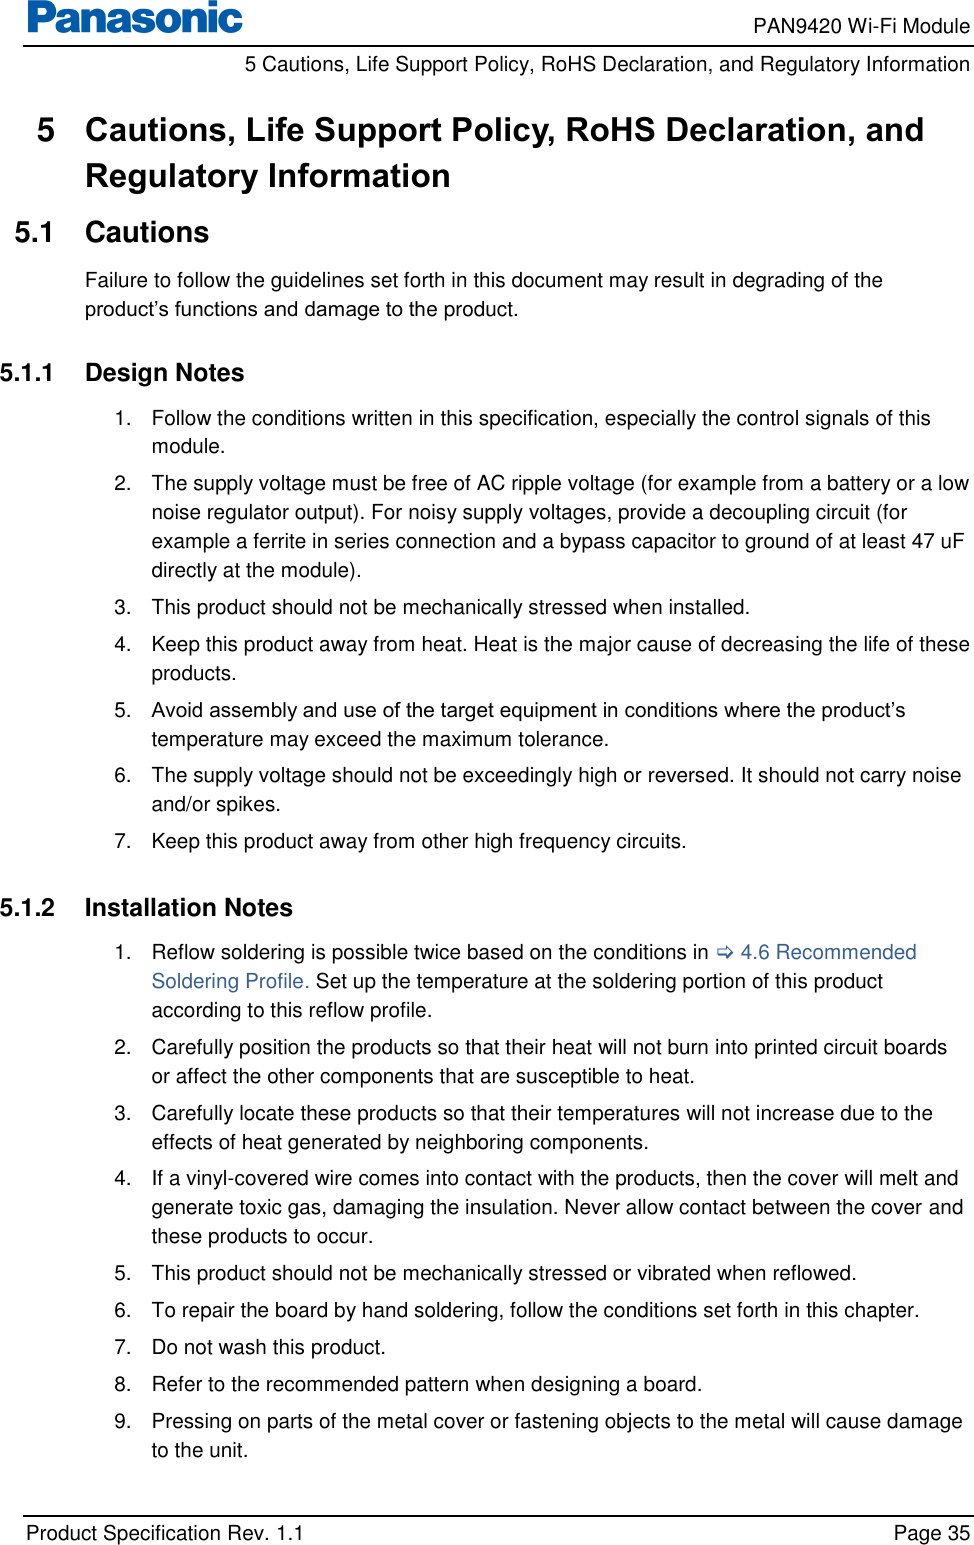     PAN9420 Wi-Fi Module         5 Cautions, Life Support Policy, RoHS Declaration, and Regulatory Information    Product Specification Rev. 1.1    Page 35  5  Cautions, Life Support Policy, RoHS Declaration, and Regulatory Information 5.1  Cautions Failure to follow the guidelines set forth in this document may result in degrading of the product’s functions and damage to the product.  5.1.1  Design Notes 1.  Follow the conditions written in this specification, especially the control signals of this module. 2.  The supply voltage must be free of AC ripple voltage (for example from a battery or a low noise regulator output). For noisy supply voltages, provide a decoupling circuit (for example a ferrite in series connection and a bypass capacitor to ground of at least 47 uF directly at the module). 3.  This product should not be mechanically stressed when installed. 4.  Keep this product away from heat. Heat is the major cause of decreasing the life of these products. 5. Avoid assembly and use of the target equipment in conditions where the product’s temperature may exceed the maximum tolerance. 6.  The supply voltage should not be exceedingly high or reversed. It should not carry noise and/or spikes. 7.  Keep this product away from other high frequency circuits.  5.1.2  Installation Notes 1.  Reflow soldering is possible twice based on the conditions in  4.6 Recommended Soldering Profile. Set up the temperature at the soldering portion of this product according to this reflow profile. 2.  Carefully position the products so that their heat will not burn into printed circuit boards or affect the other components that are susceptible to heat. 3.  Carefully locate these products so that their temperatures will not increase due to the effects of heat generated by neighboring components. 4.  If a vinyl-covered wire comes into contact with the products, then the cover will melt and generate toxic gas, damaging the insulation. Never allow contact between the cover and these products to occur. 5.  This product should not be mechanically stressed or vibrated when reflowed. 6.  To repair the board by hand soldering, follow the conditions set forth in this chapter. 7.  Do not wash this product. 8.  Refer to the recommended pattern when designing a board. 9.  Pressing on parts of the metal cover or fastening objects to the metal will cause damage to the unit.  